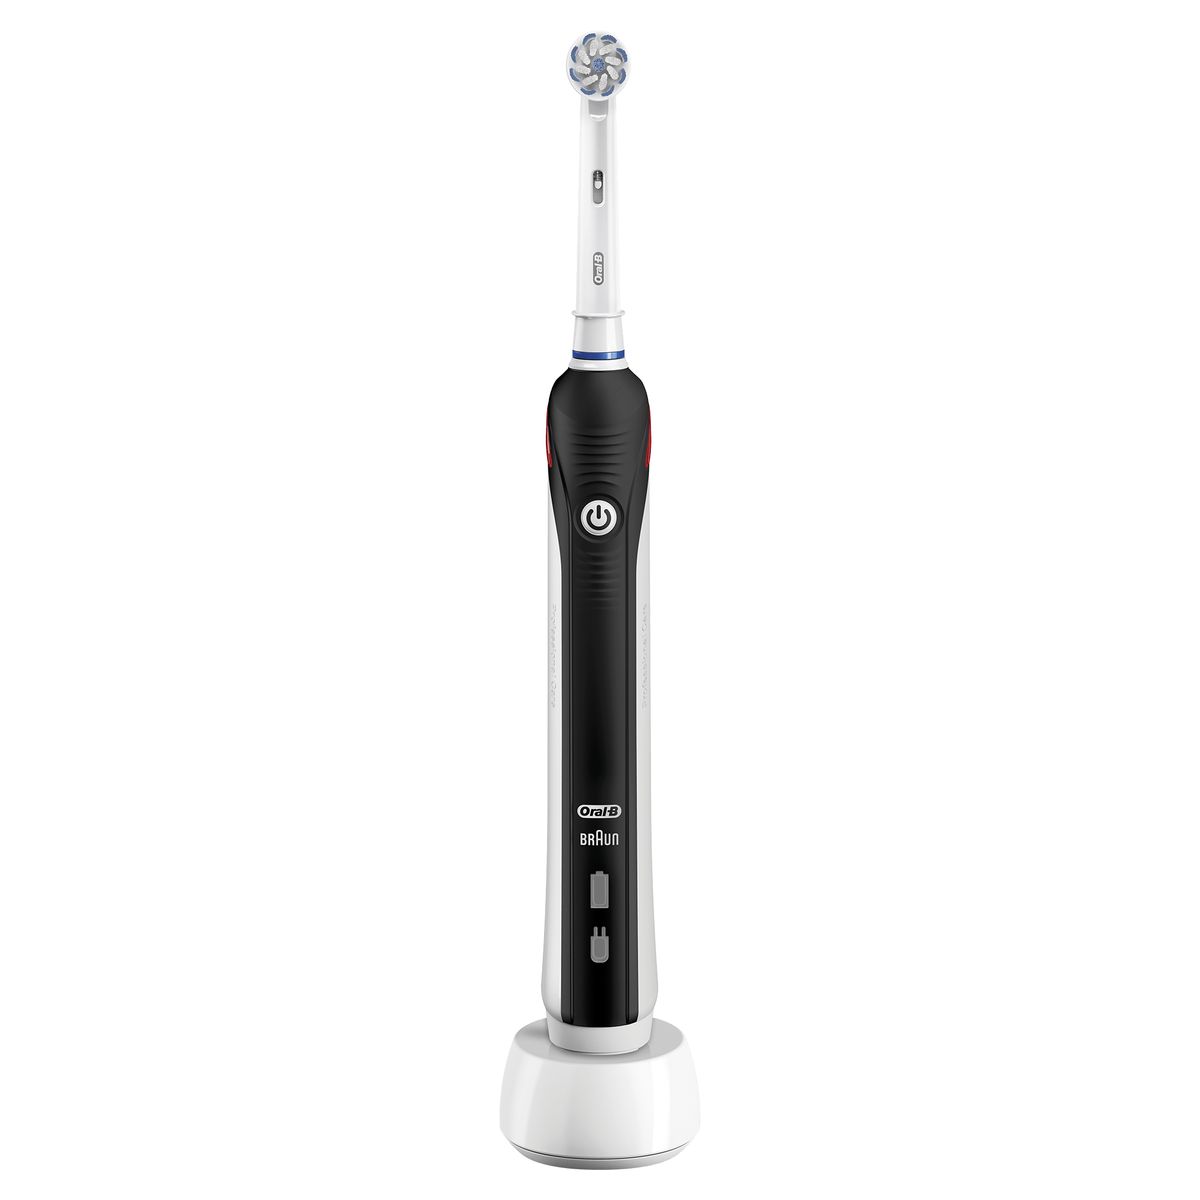 Oral-B PRO 2 2500 Electric toothbrush, with visual pressure control for extra gum protection and free travel case, black Single